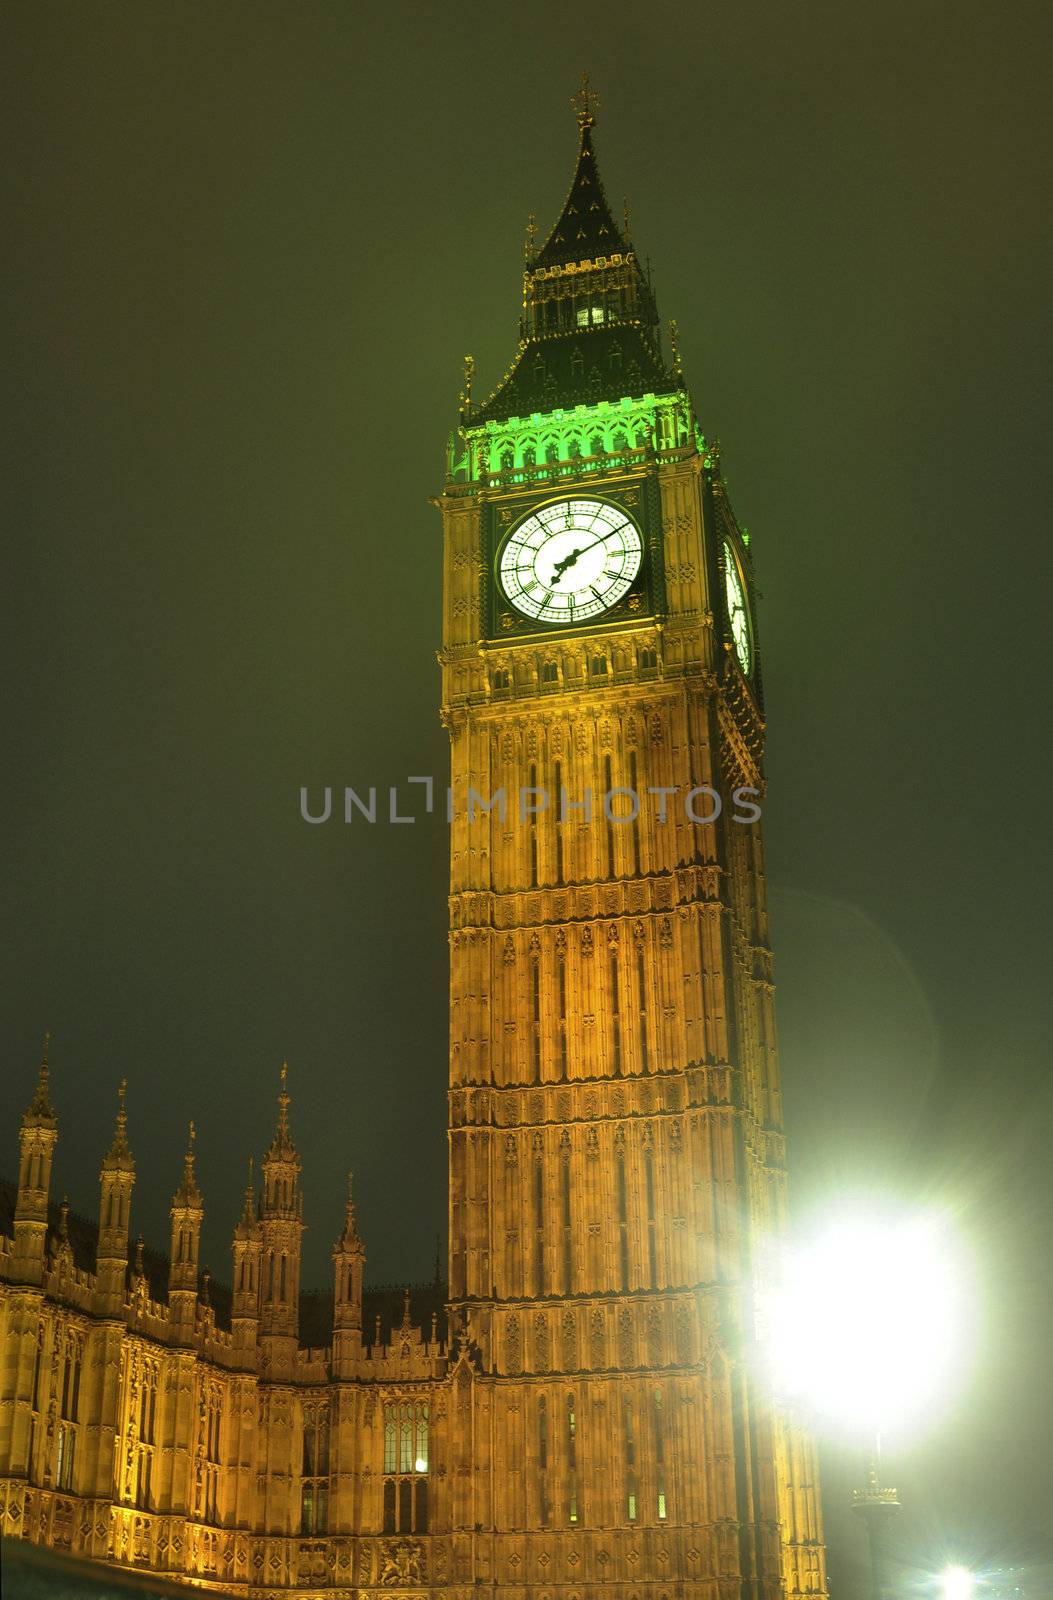 The houses of parliament and Big Ben illuminated at night 